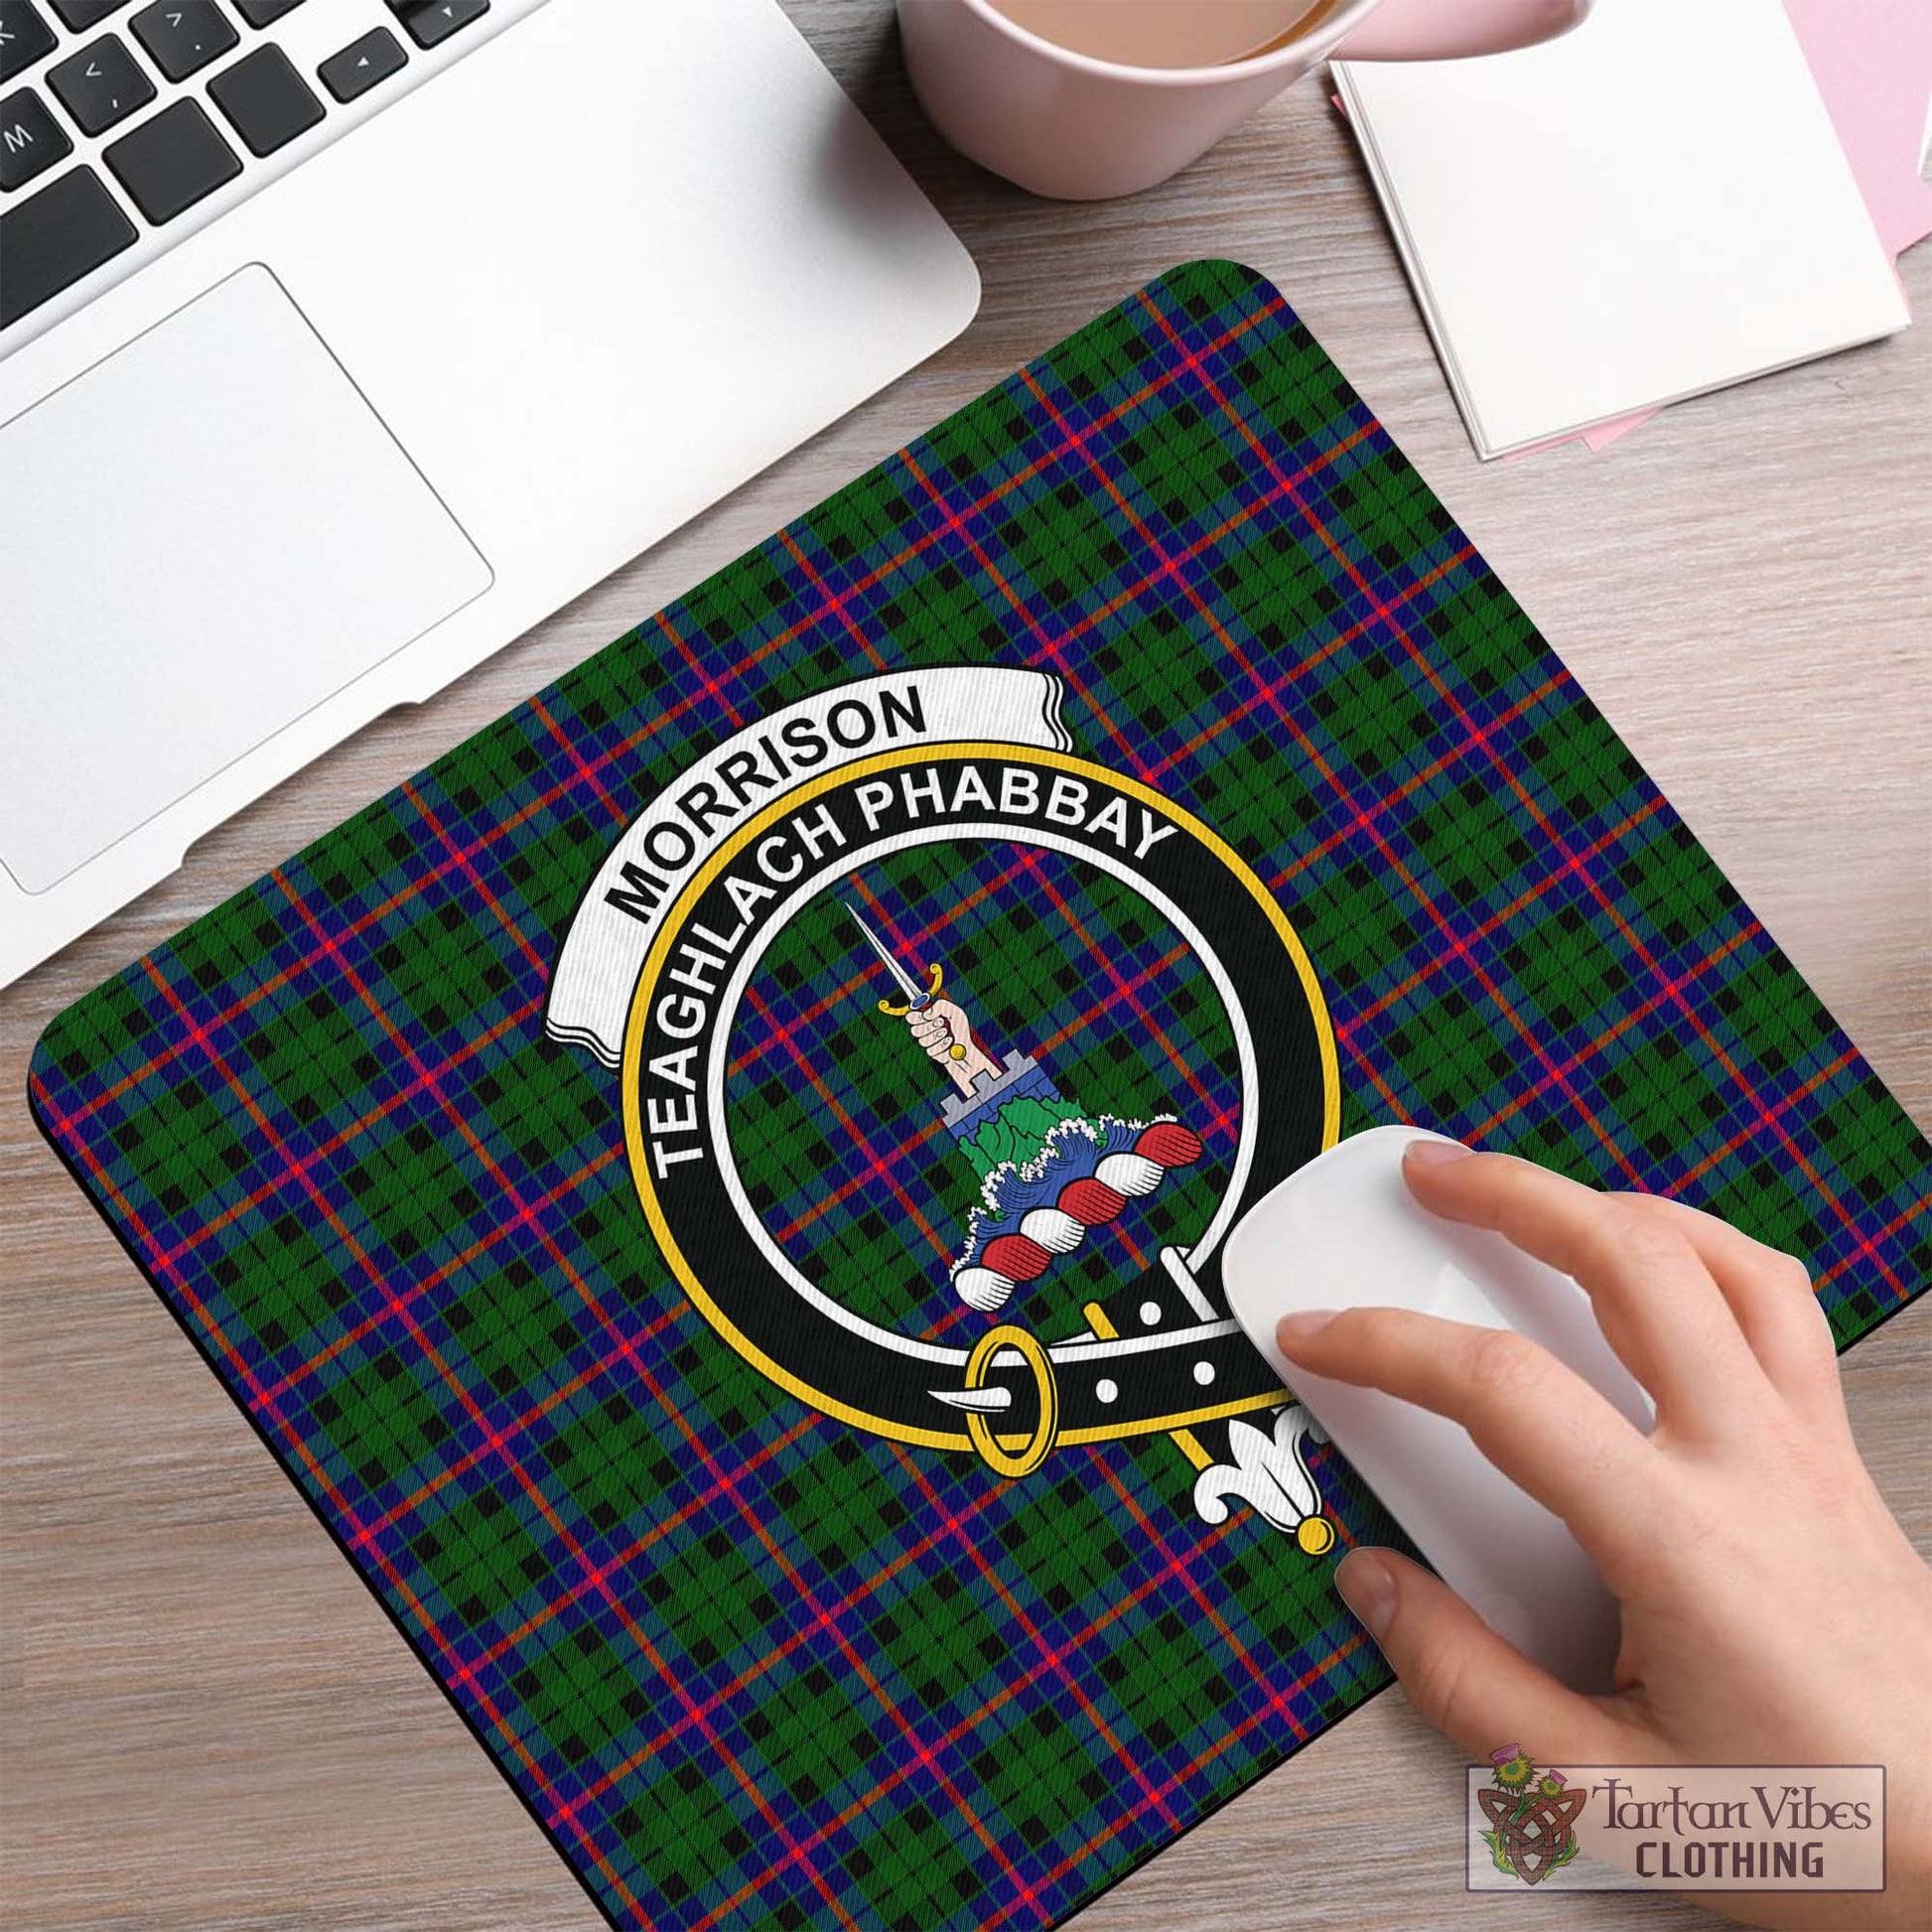 Tartan Vibes Clothing Morrison Modern Tartan Mouse Pad with Family Crest